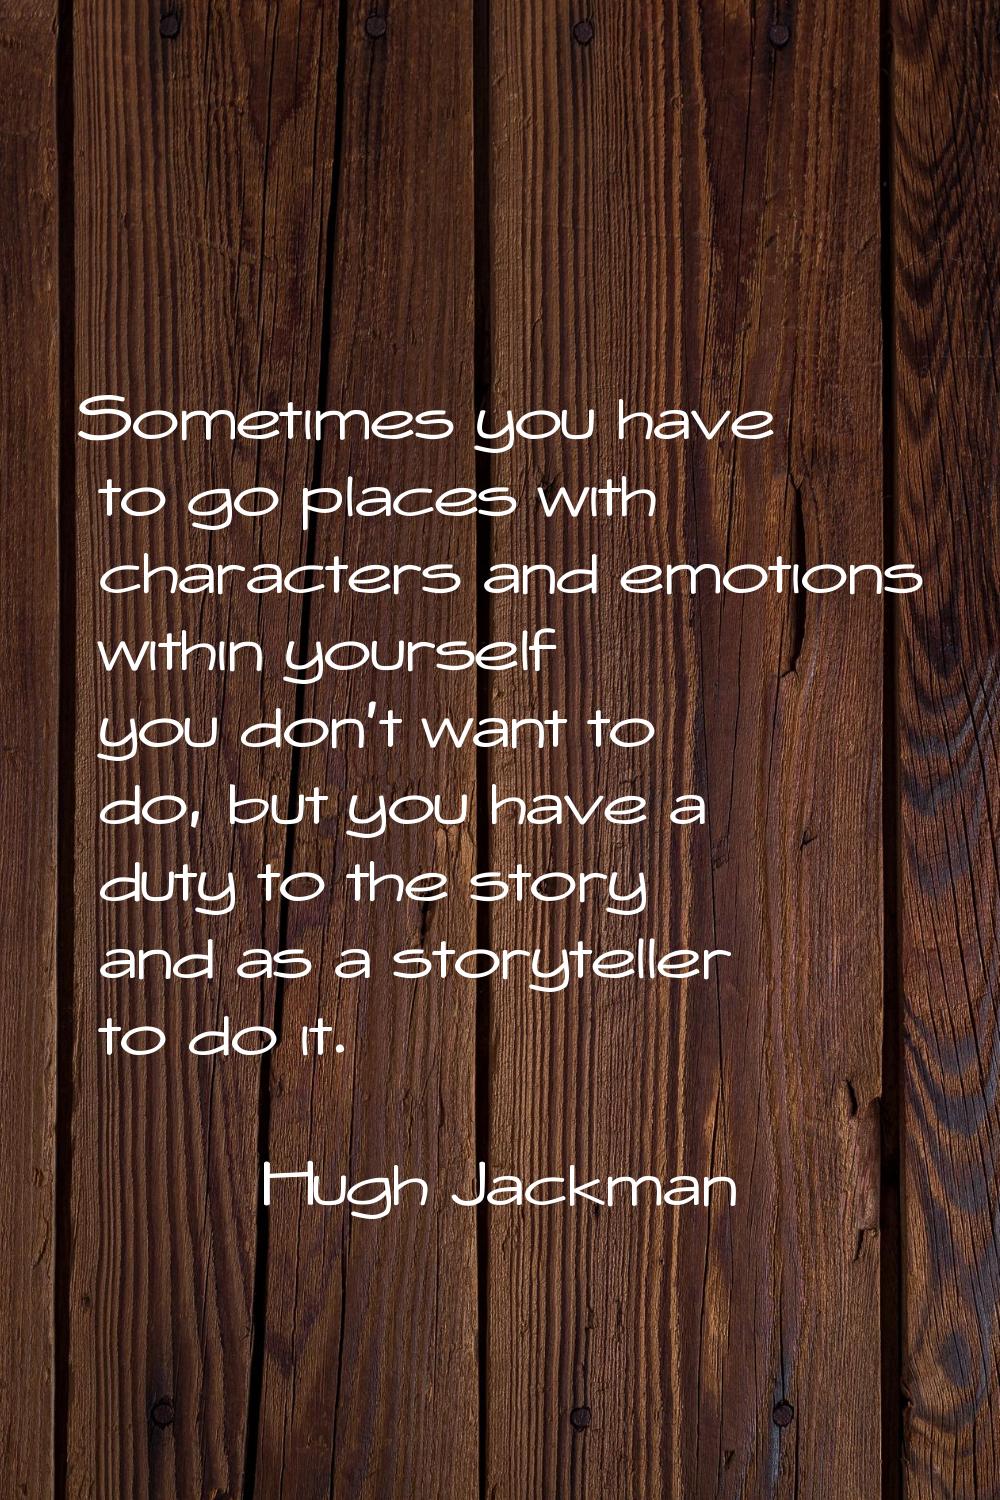 Sometimes you have to go places with characters and emotions within yourself you don't want to do, 